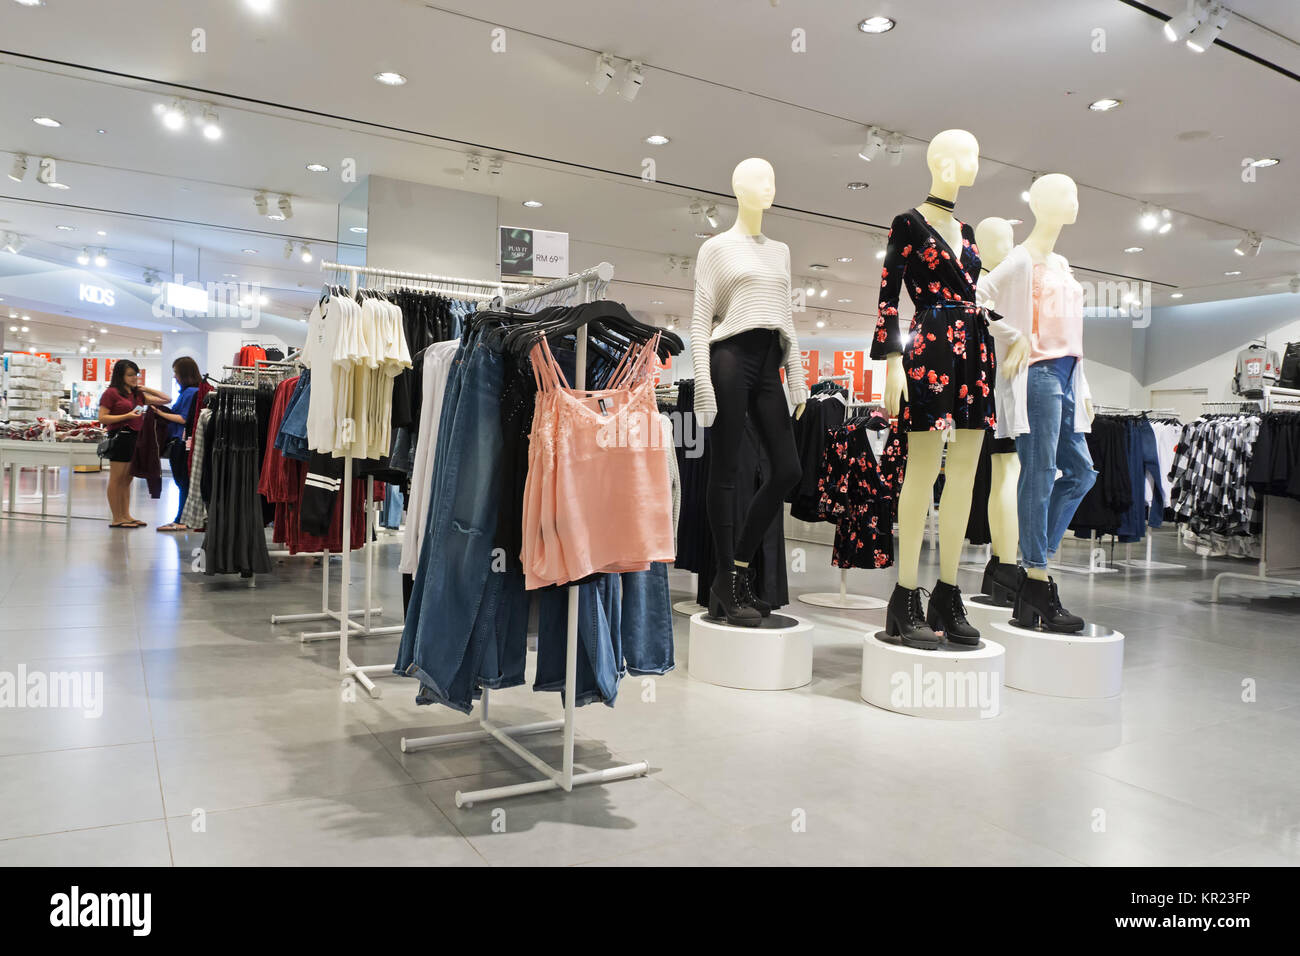 Kota Kinabalu, Malaysia - December 14, 2017: Inside of H and M store in ...